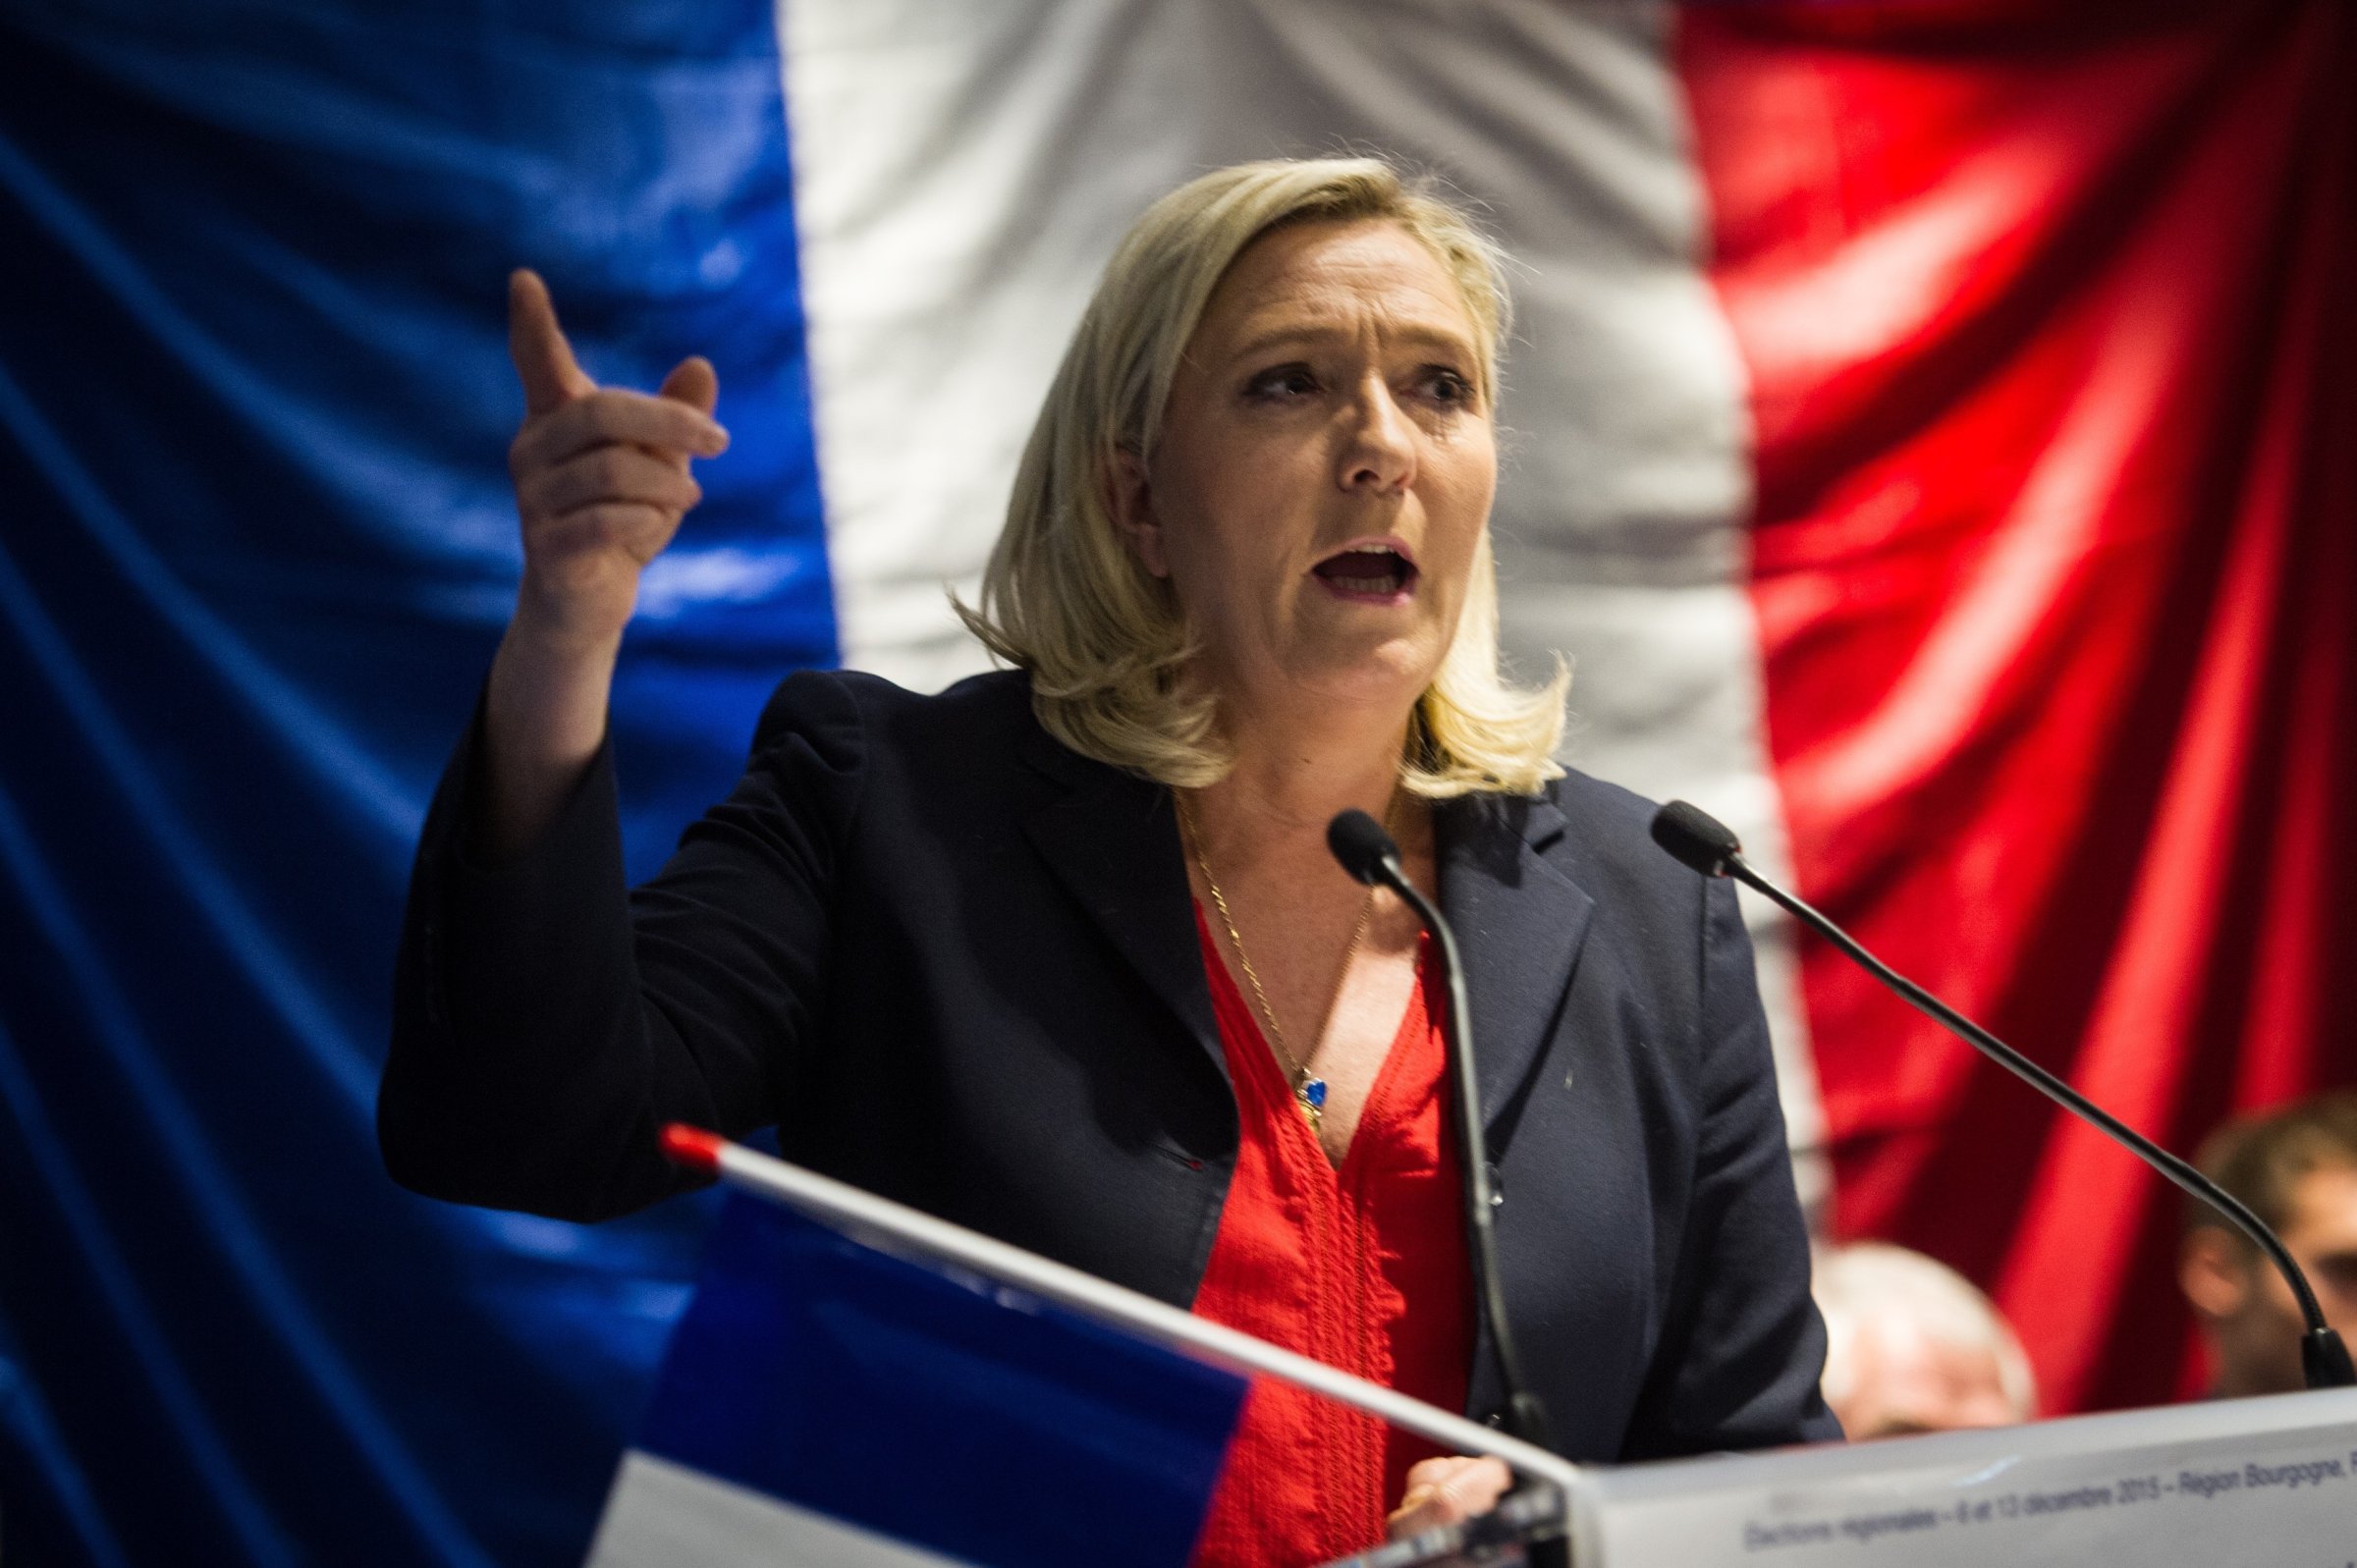 Head of the Front National (FN) far-right party, Marine Le Pen, delivers a speech during a meeting on Oct. 28, 2015.